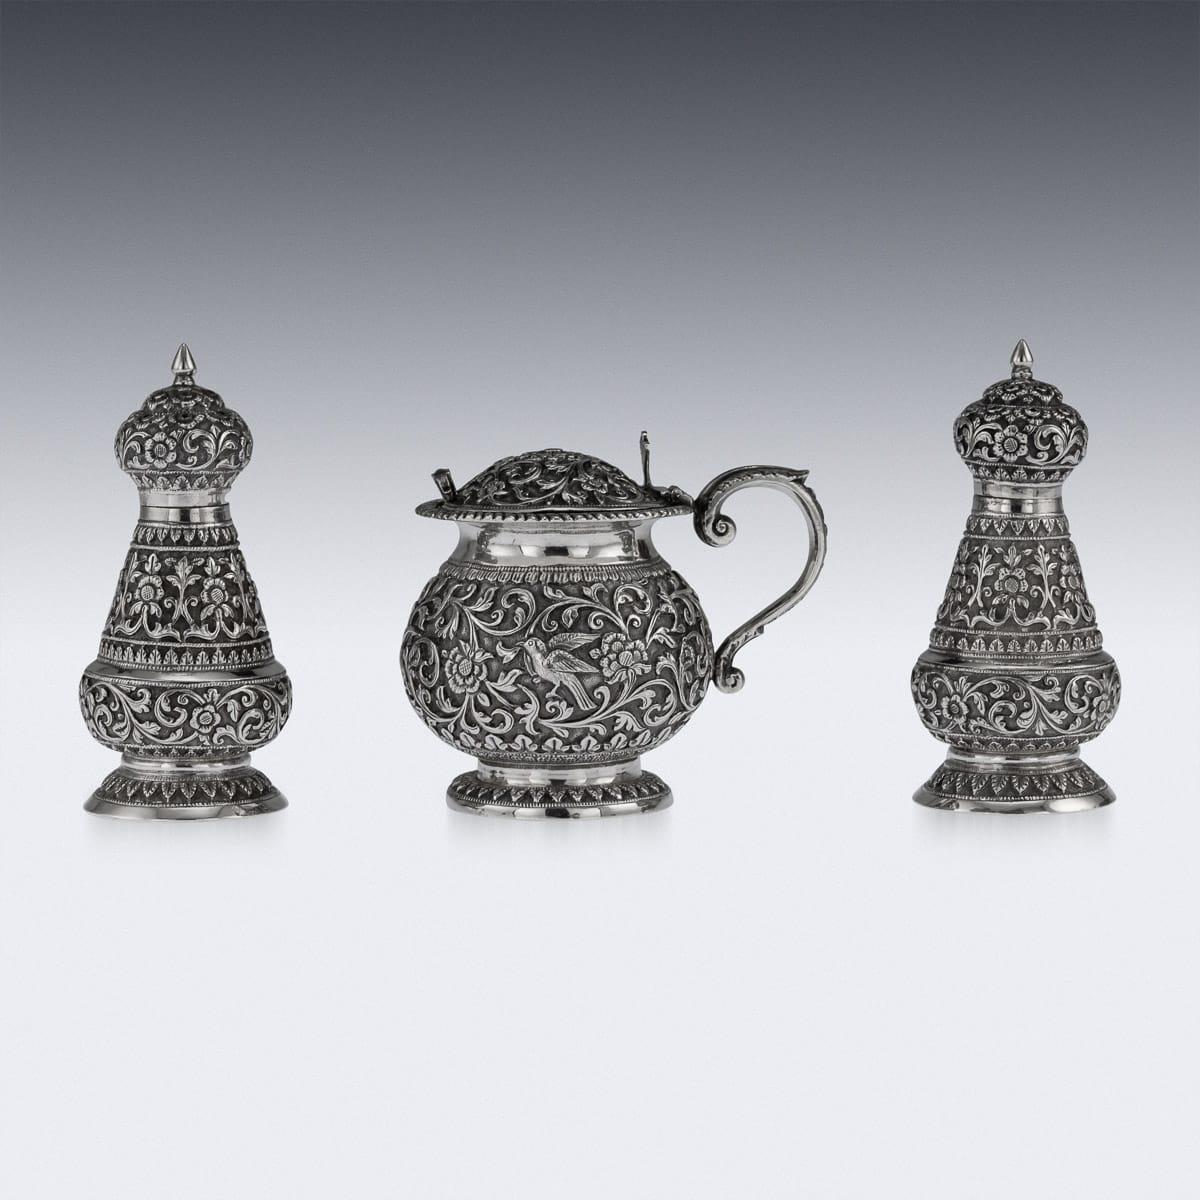 Antique late 19th century Indian solid silver repousse three-piece condiment set, comprising of a lidded mustard pot with spoon, salt and pepper shakers, each piece is profusely and beautifully repousse' decorated with scrolling foliage and flowers